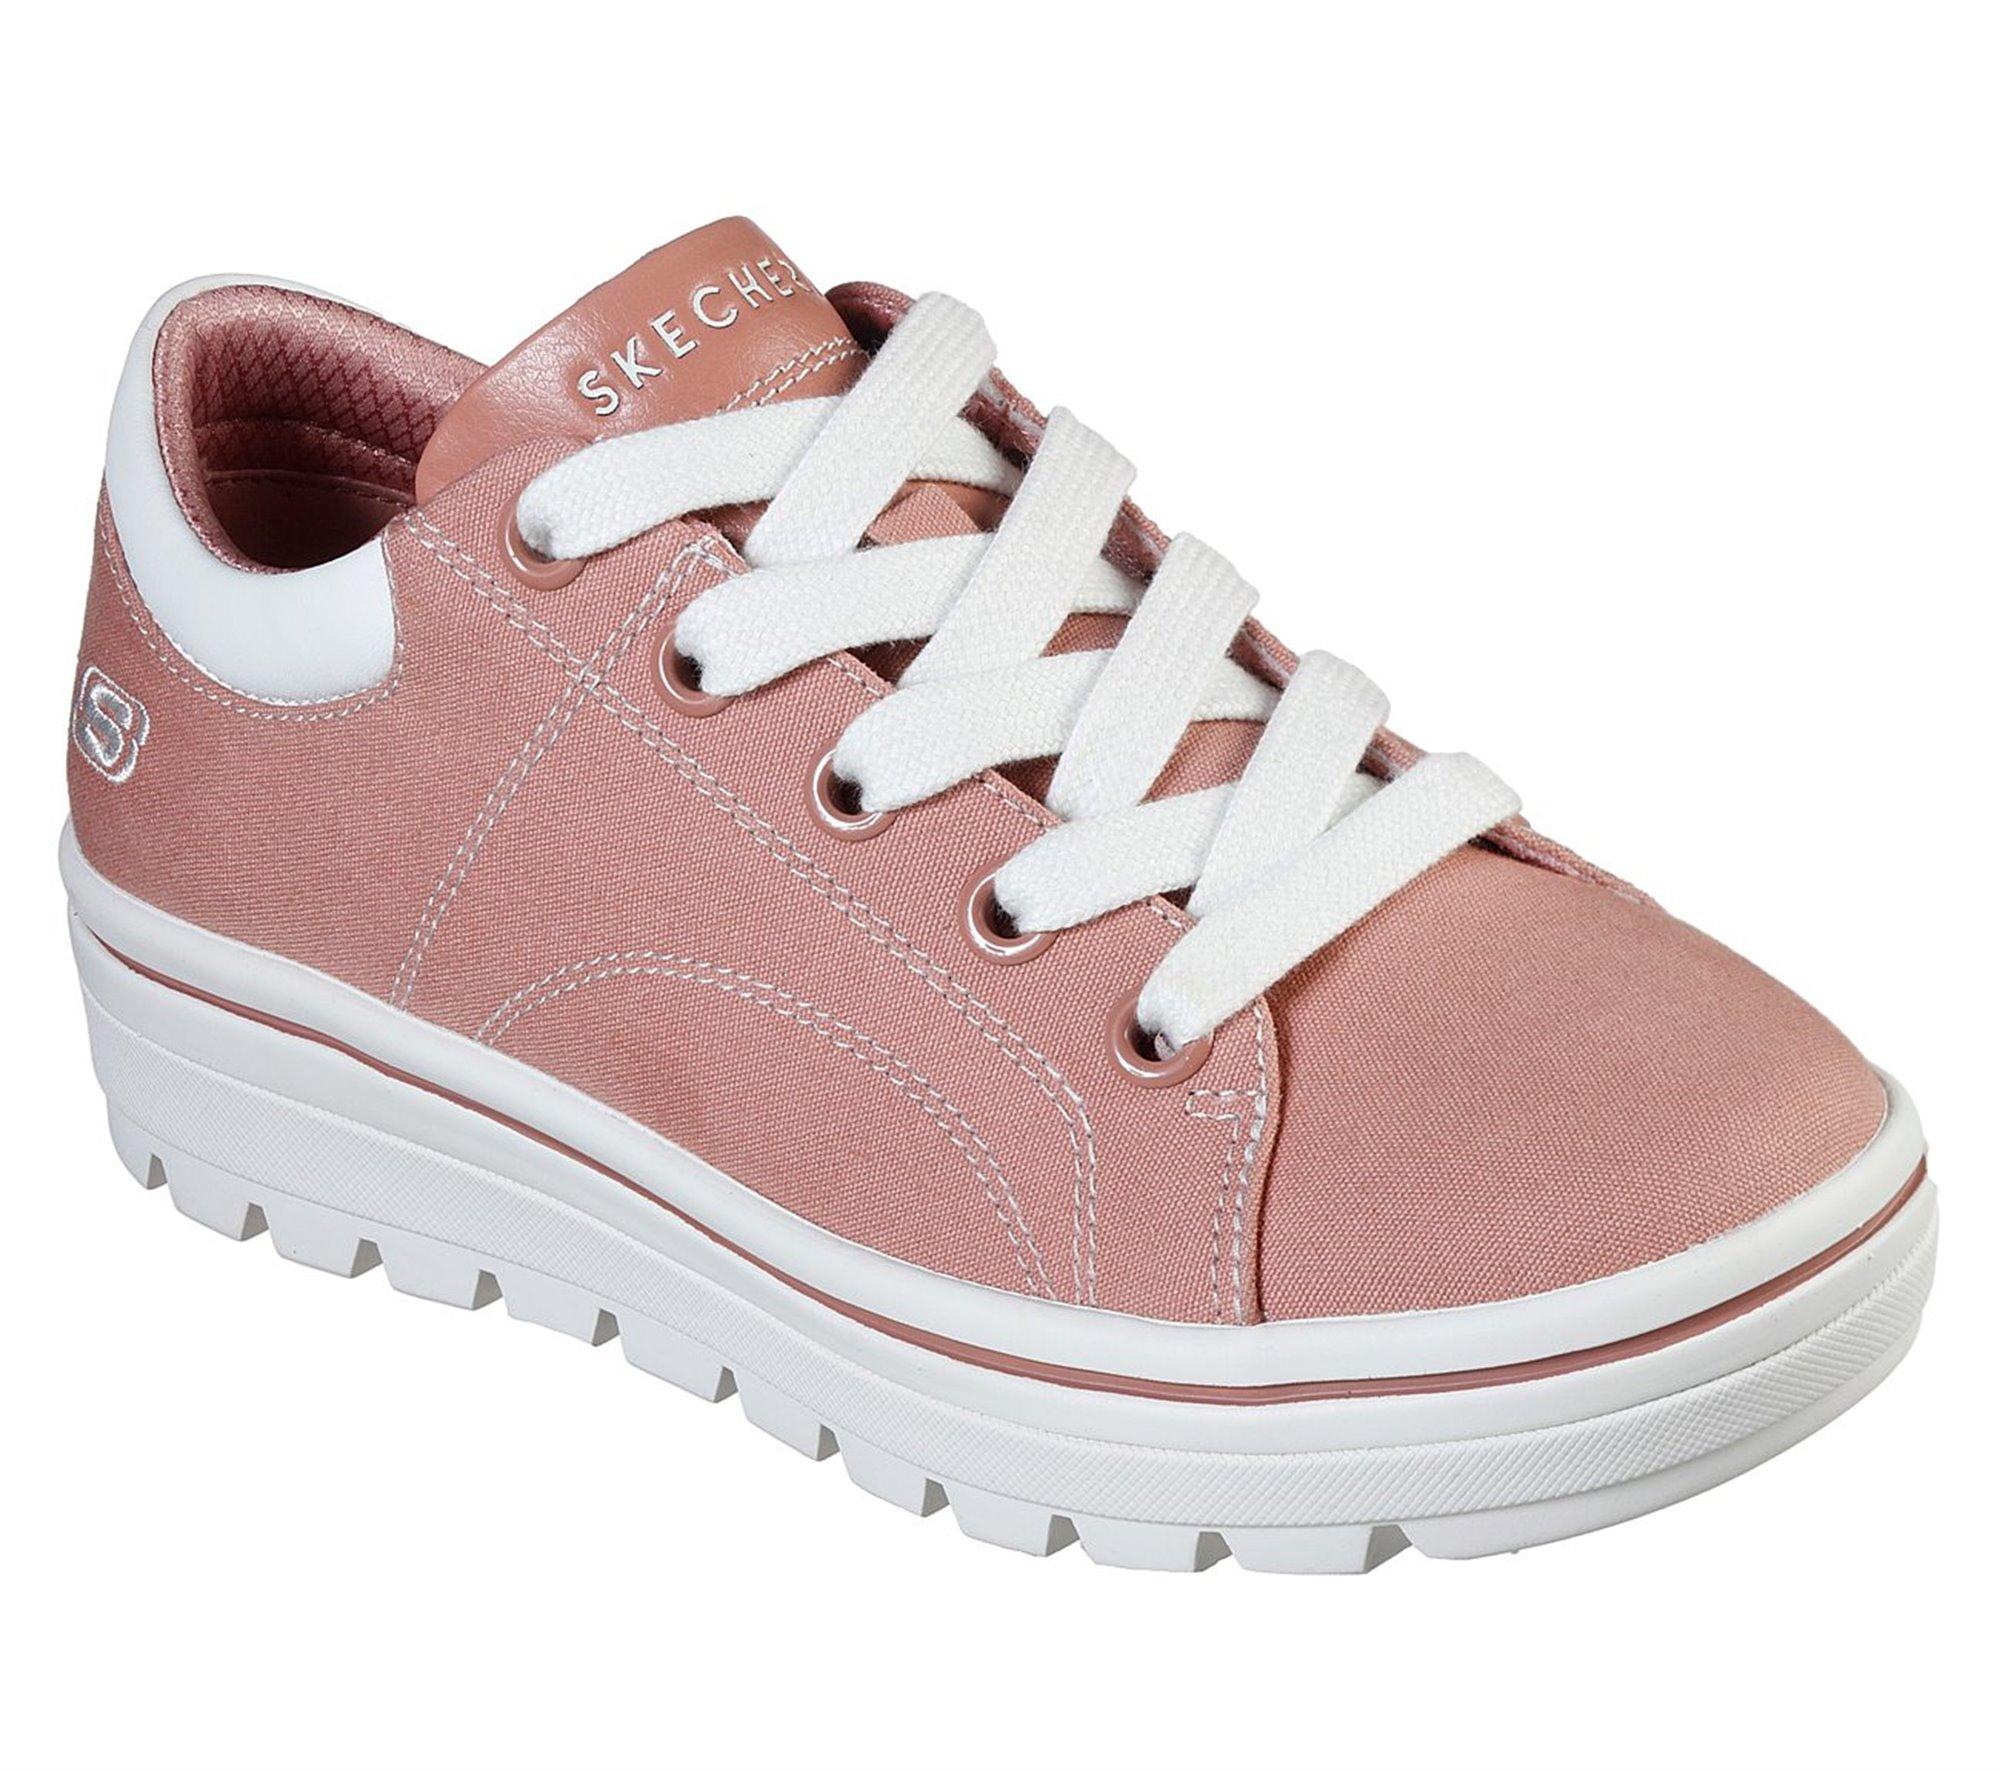 Skechers Street Cleat. Canvas Contrast Stitch Lace Up Sneaker in Rose  (Pink) - Lyst